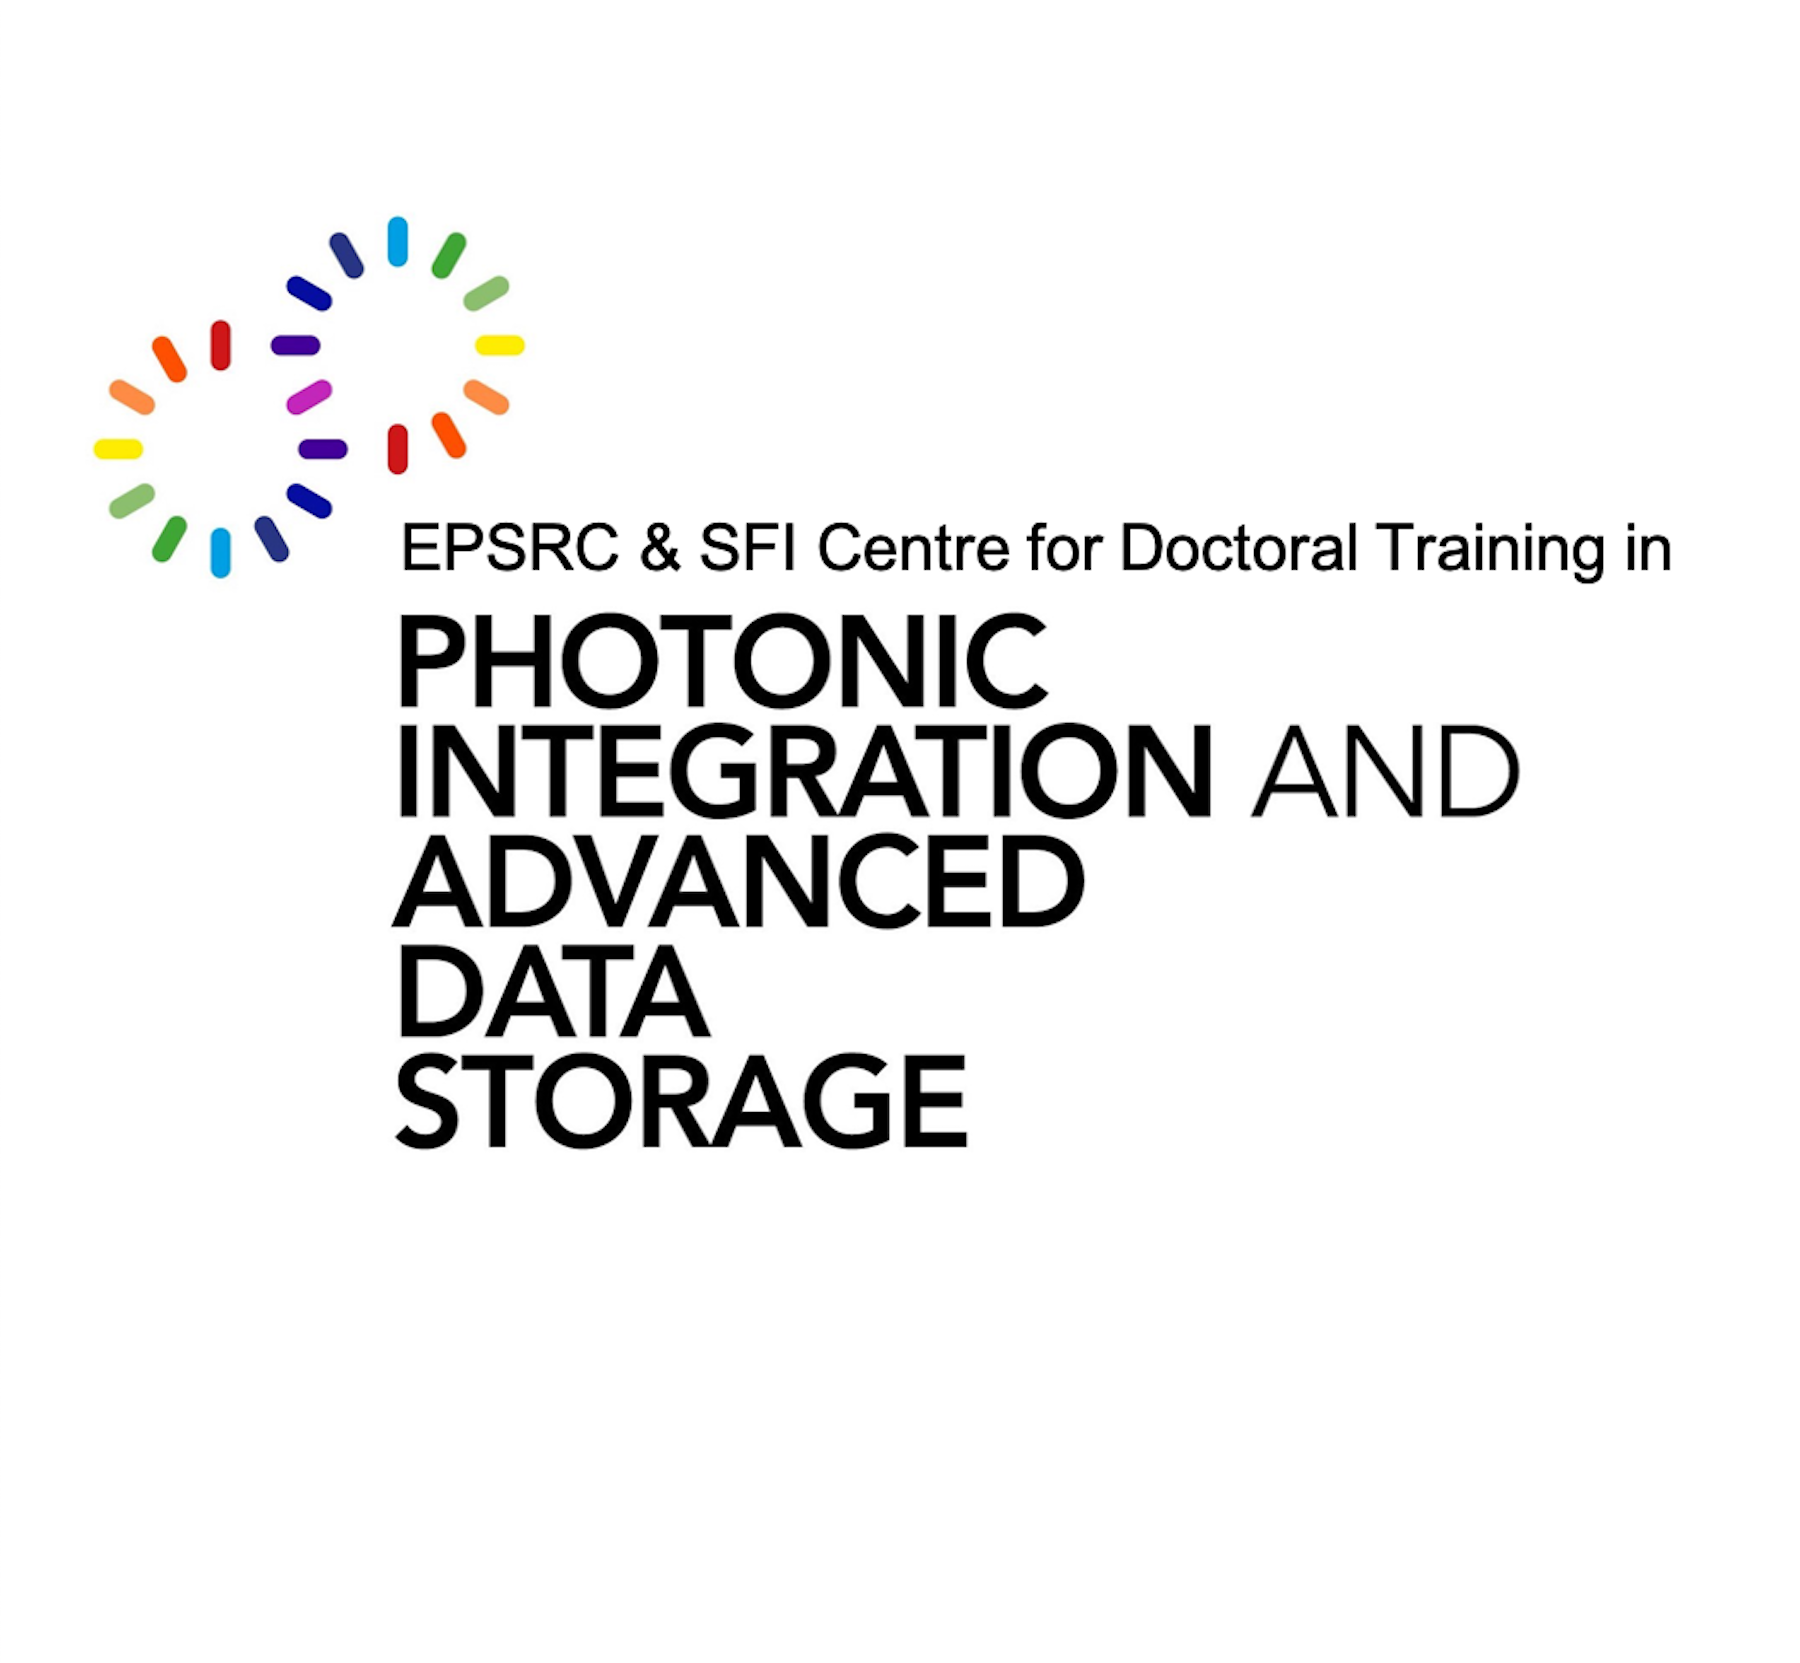 Photonic Integration and Advanced Data Storage Centre for Doctoral Training